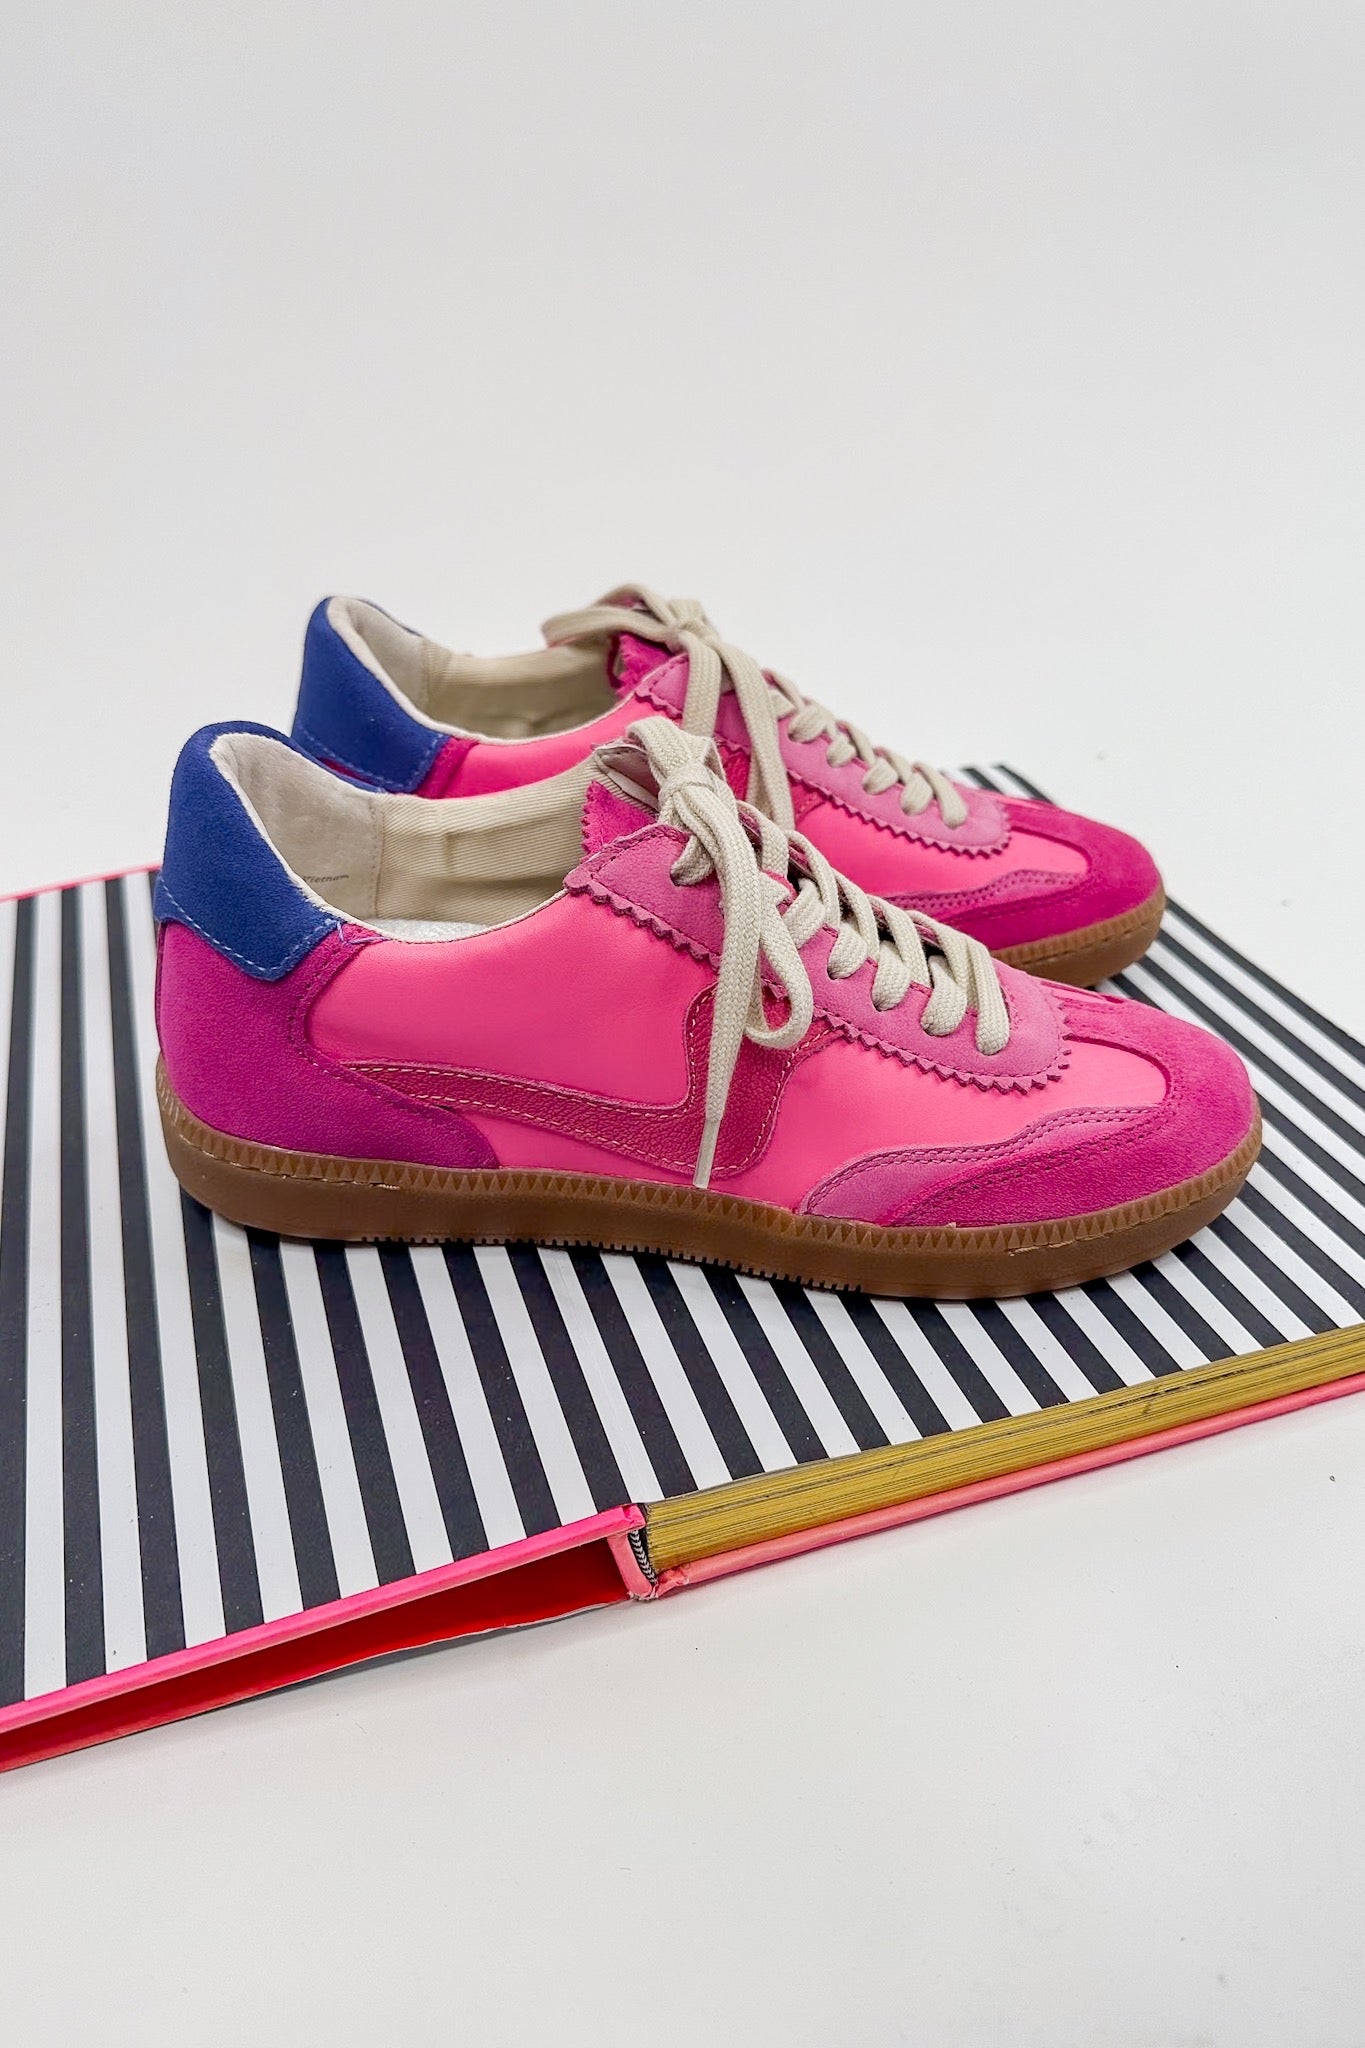 Dolce Vita Notice Sneakers in Hot Pink/Blue